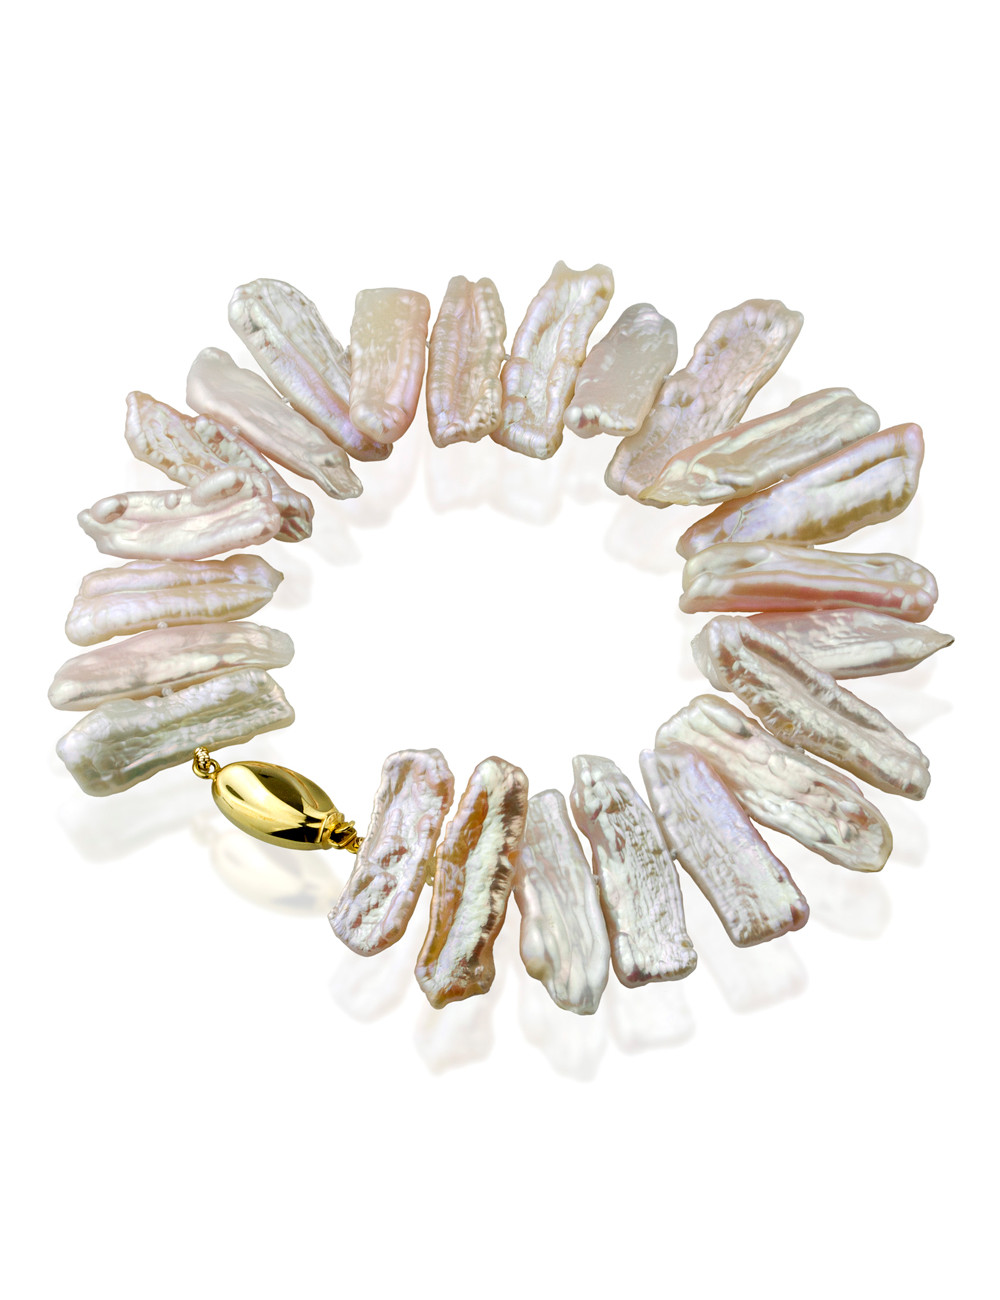 Bracelet of oblong baroque pearls with irregular surface and light pink color NŁUPG2